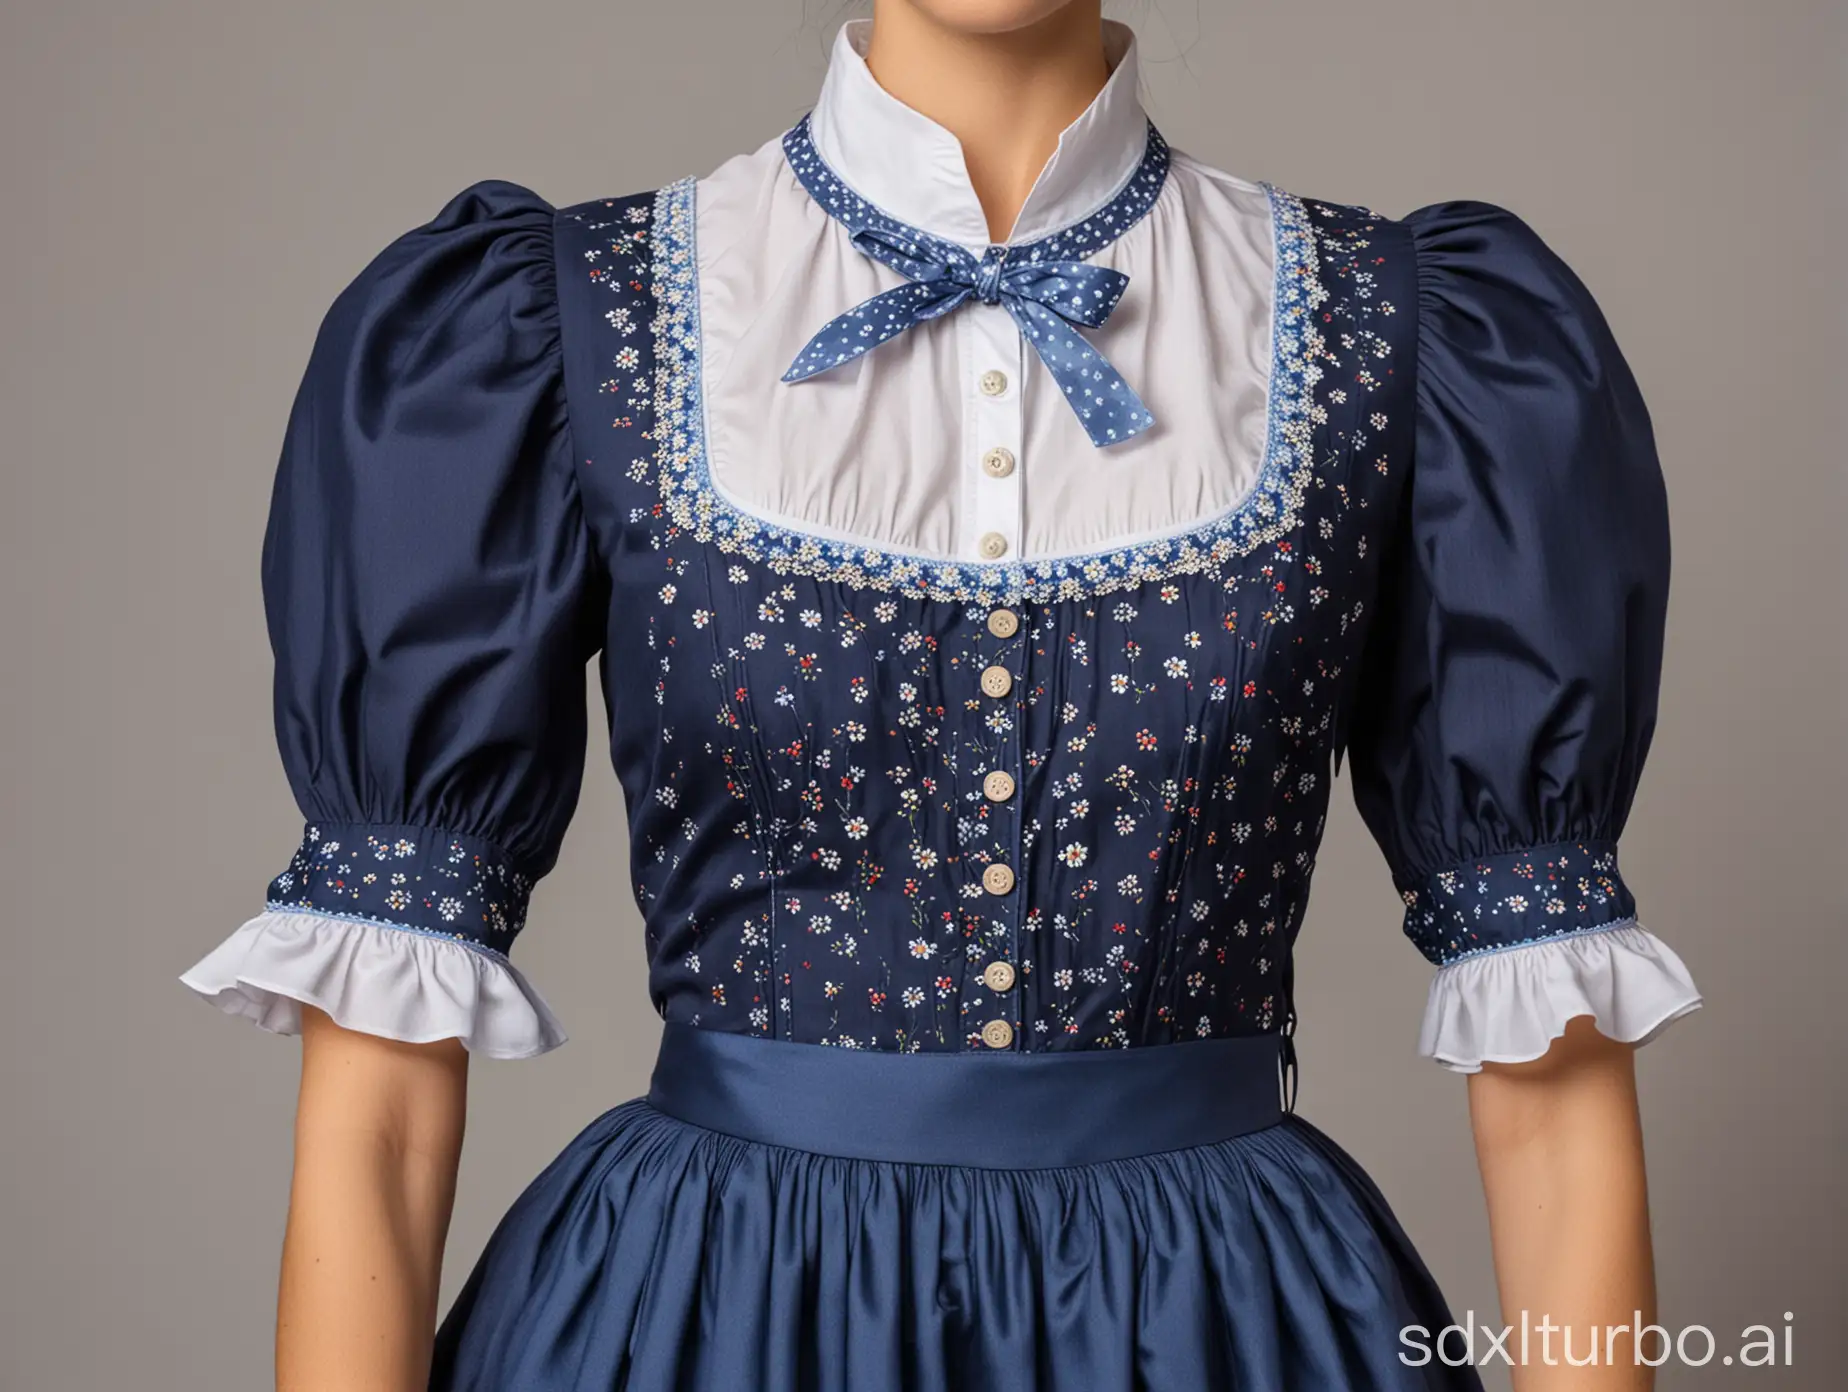 Traditional-Dark-Blue-MidiDirndl-with-Light-Blue-Apron-and-Silver-Buttons